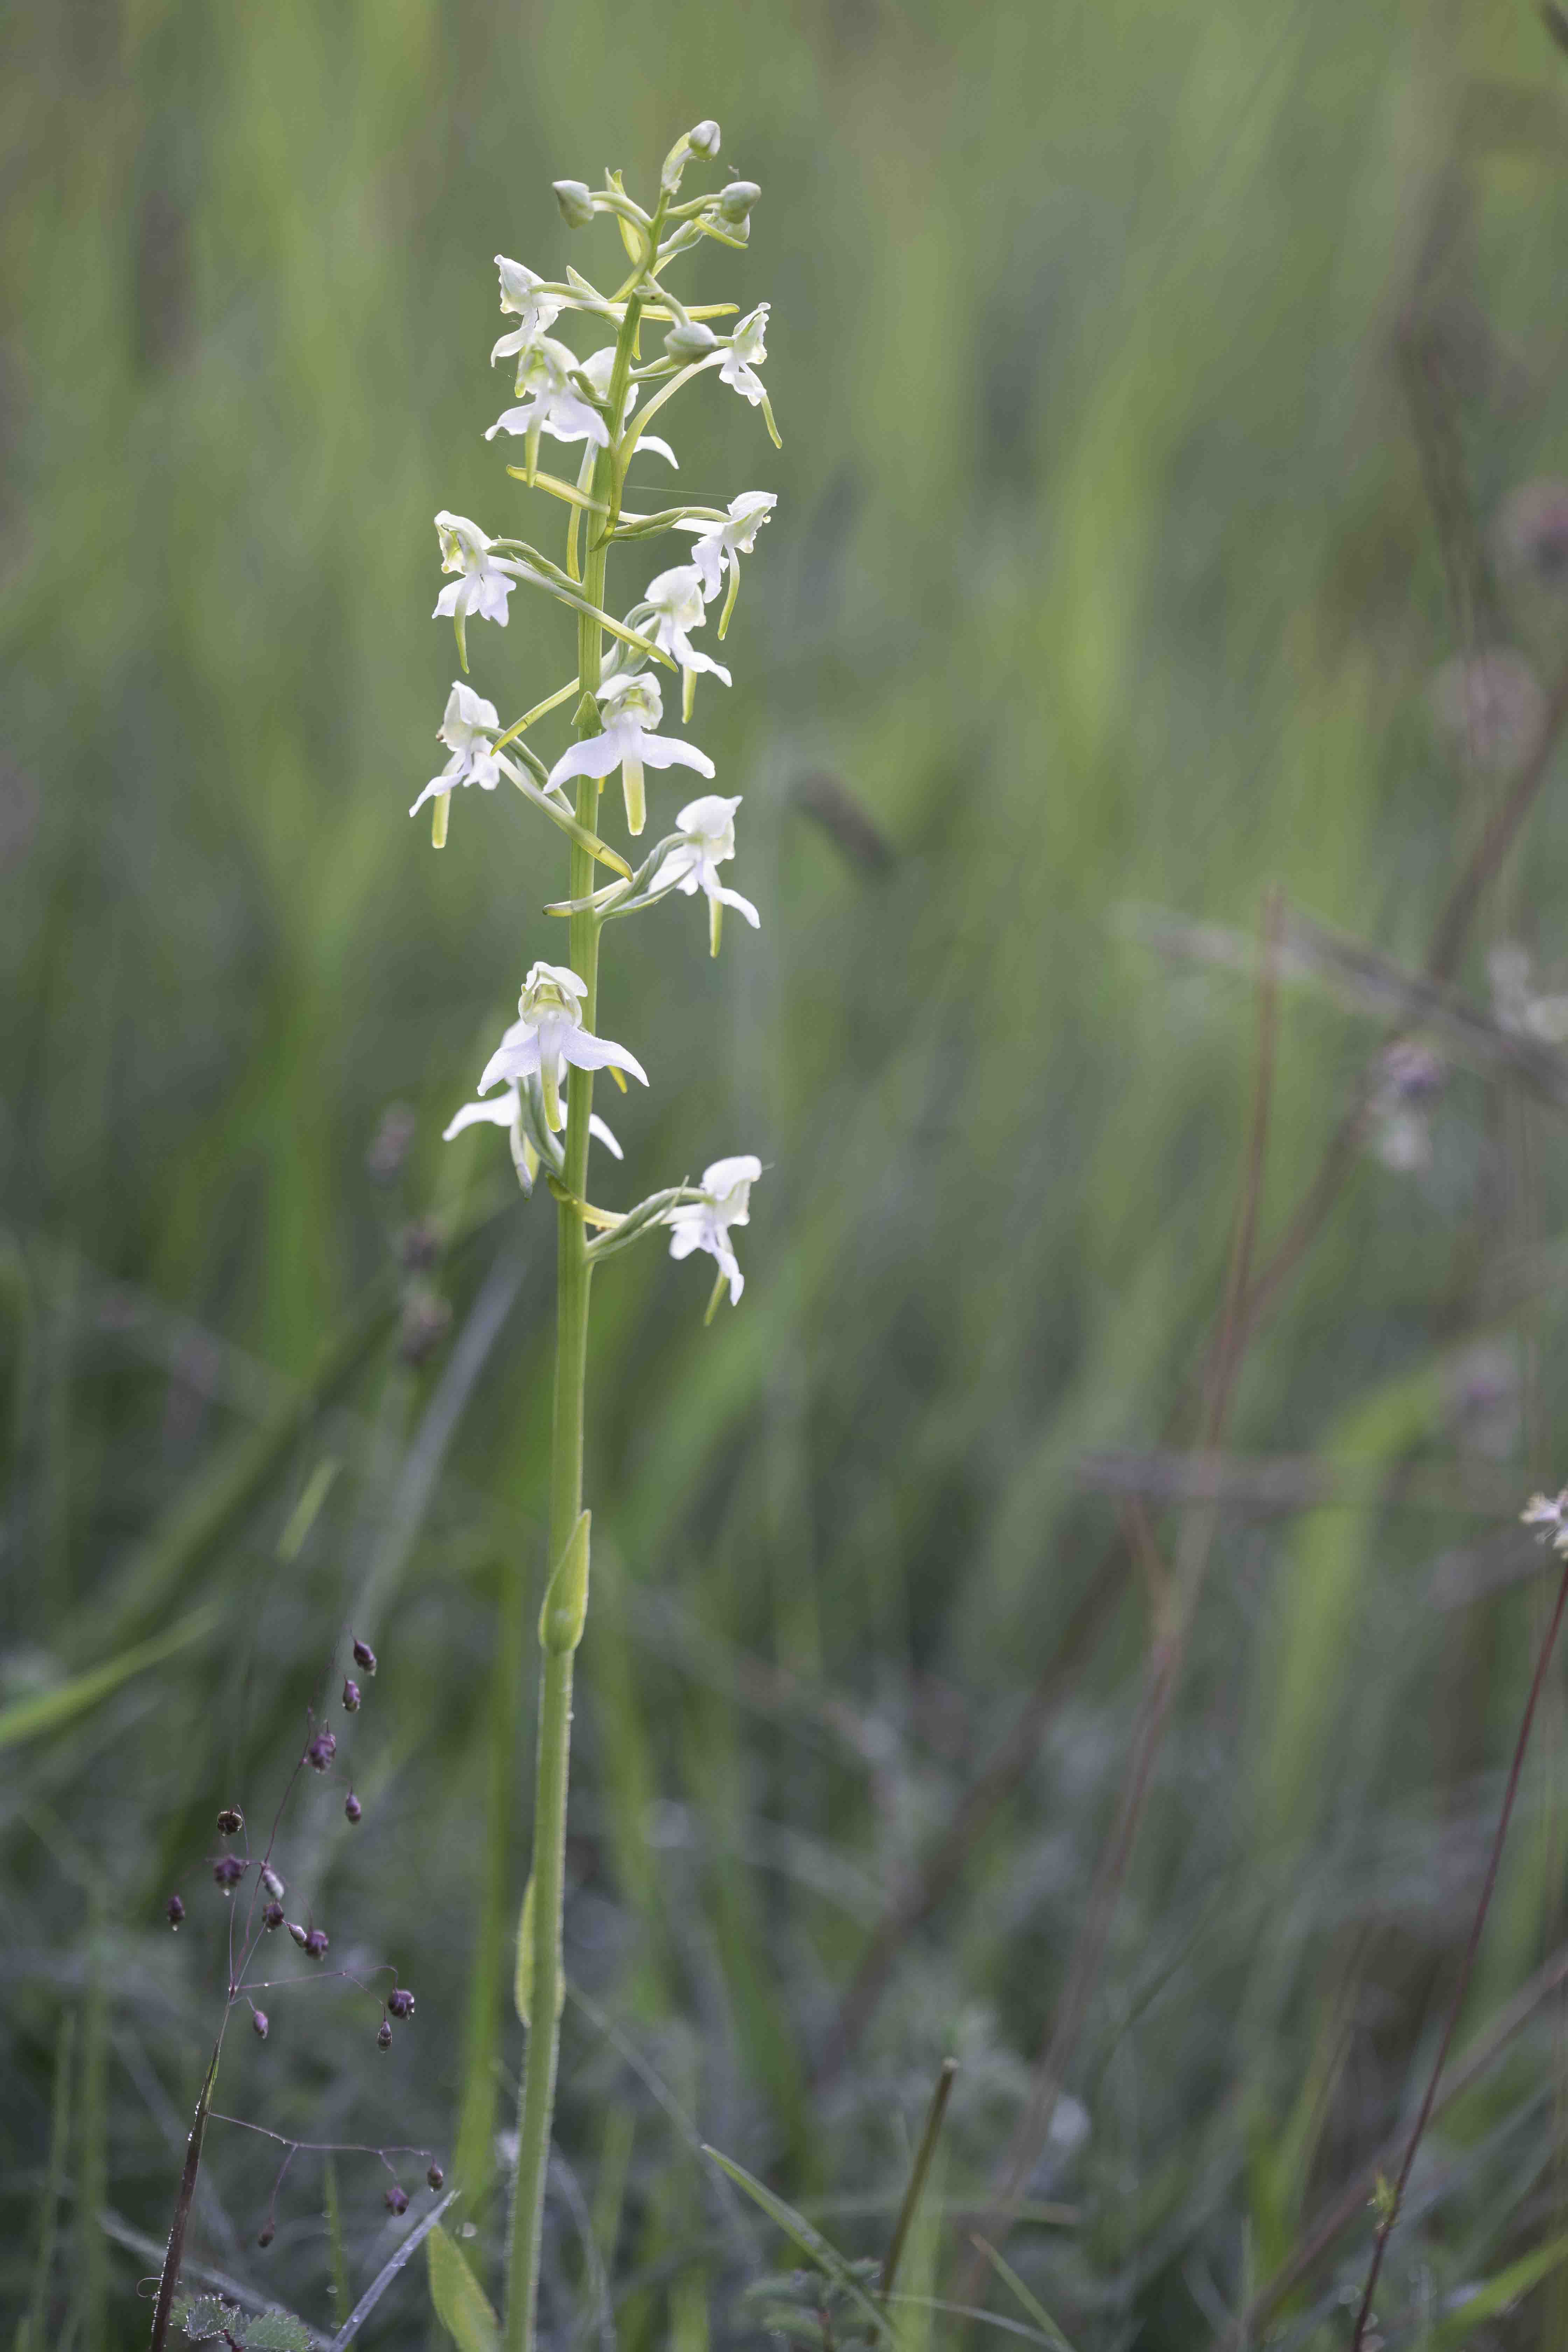 Greater Butterfly-Orchid (Platanthera chlorantha)